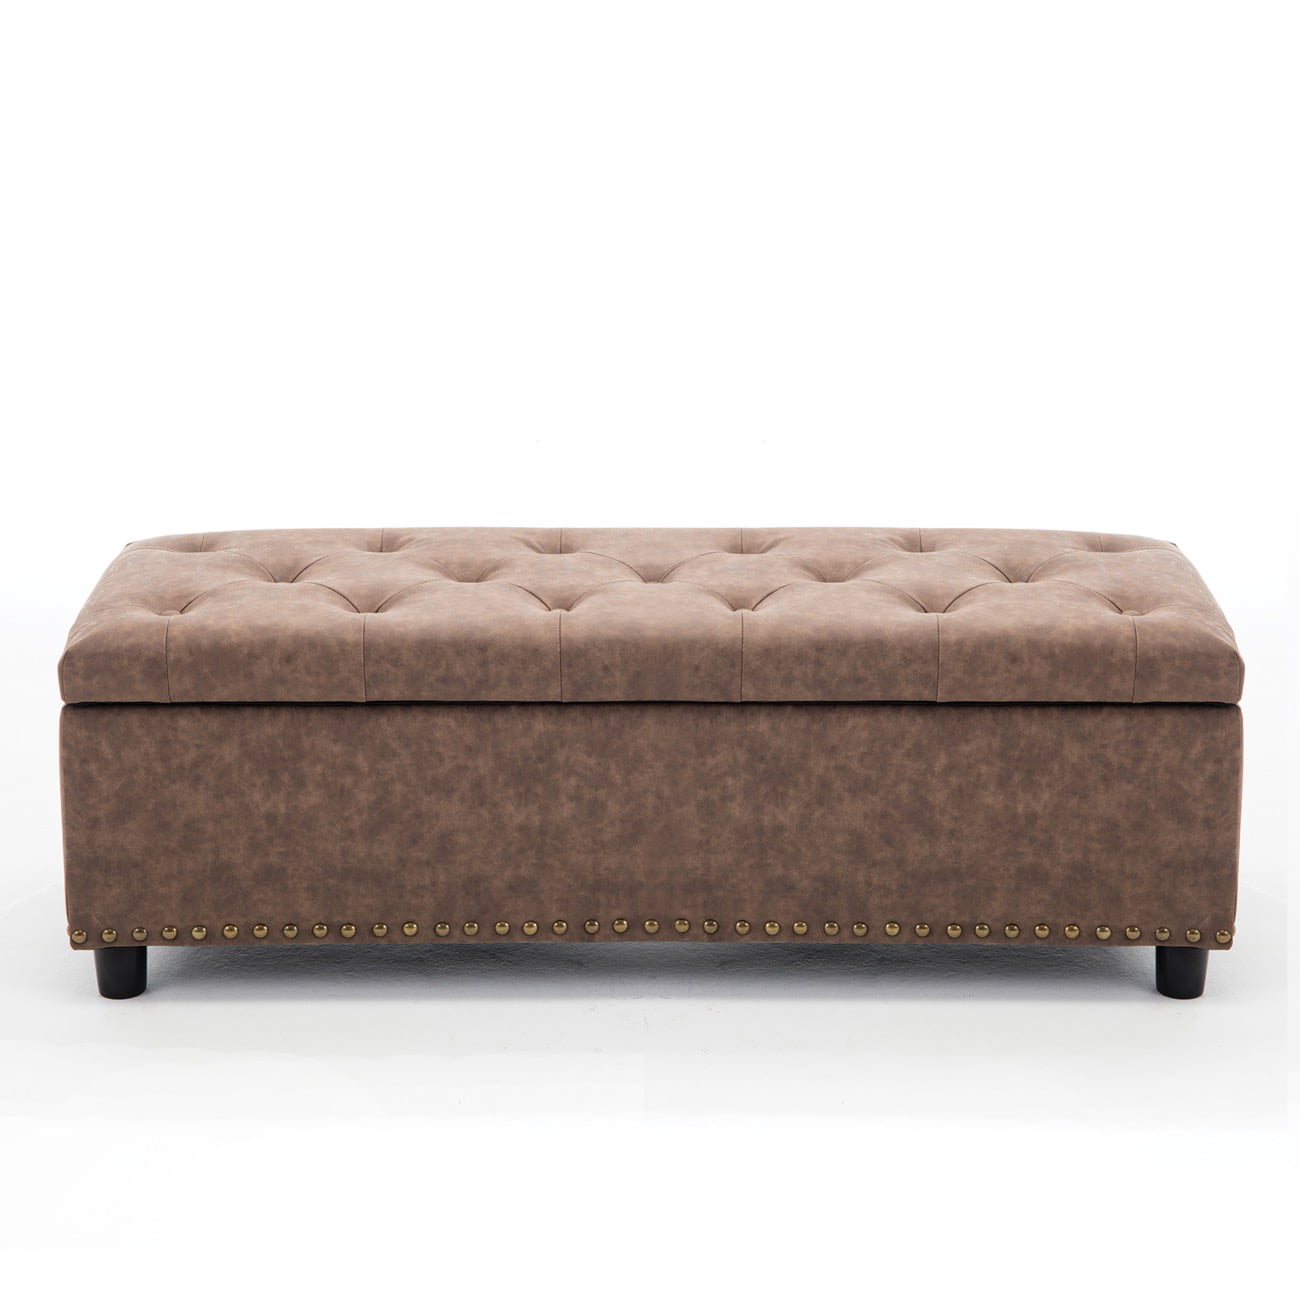 Belleze 48 Upholstered Faux Leather, Tufted Leather Storage Ottoman